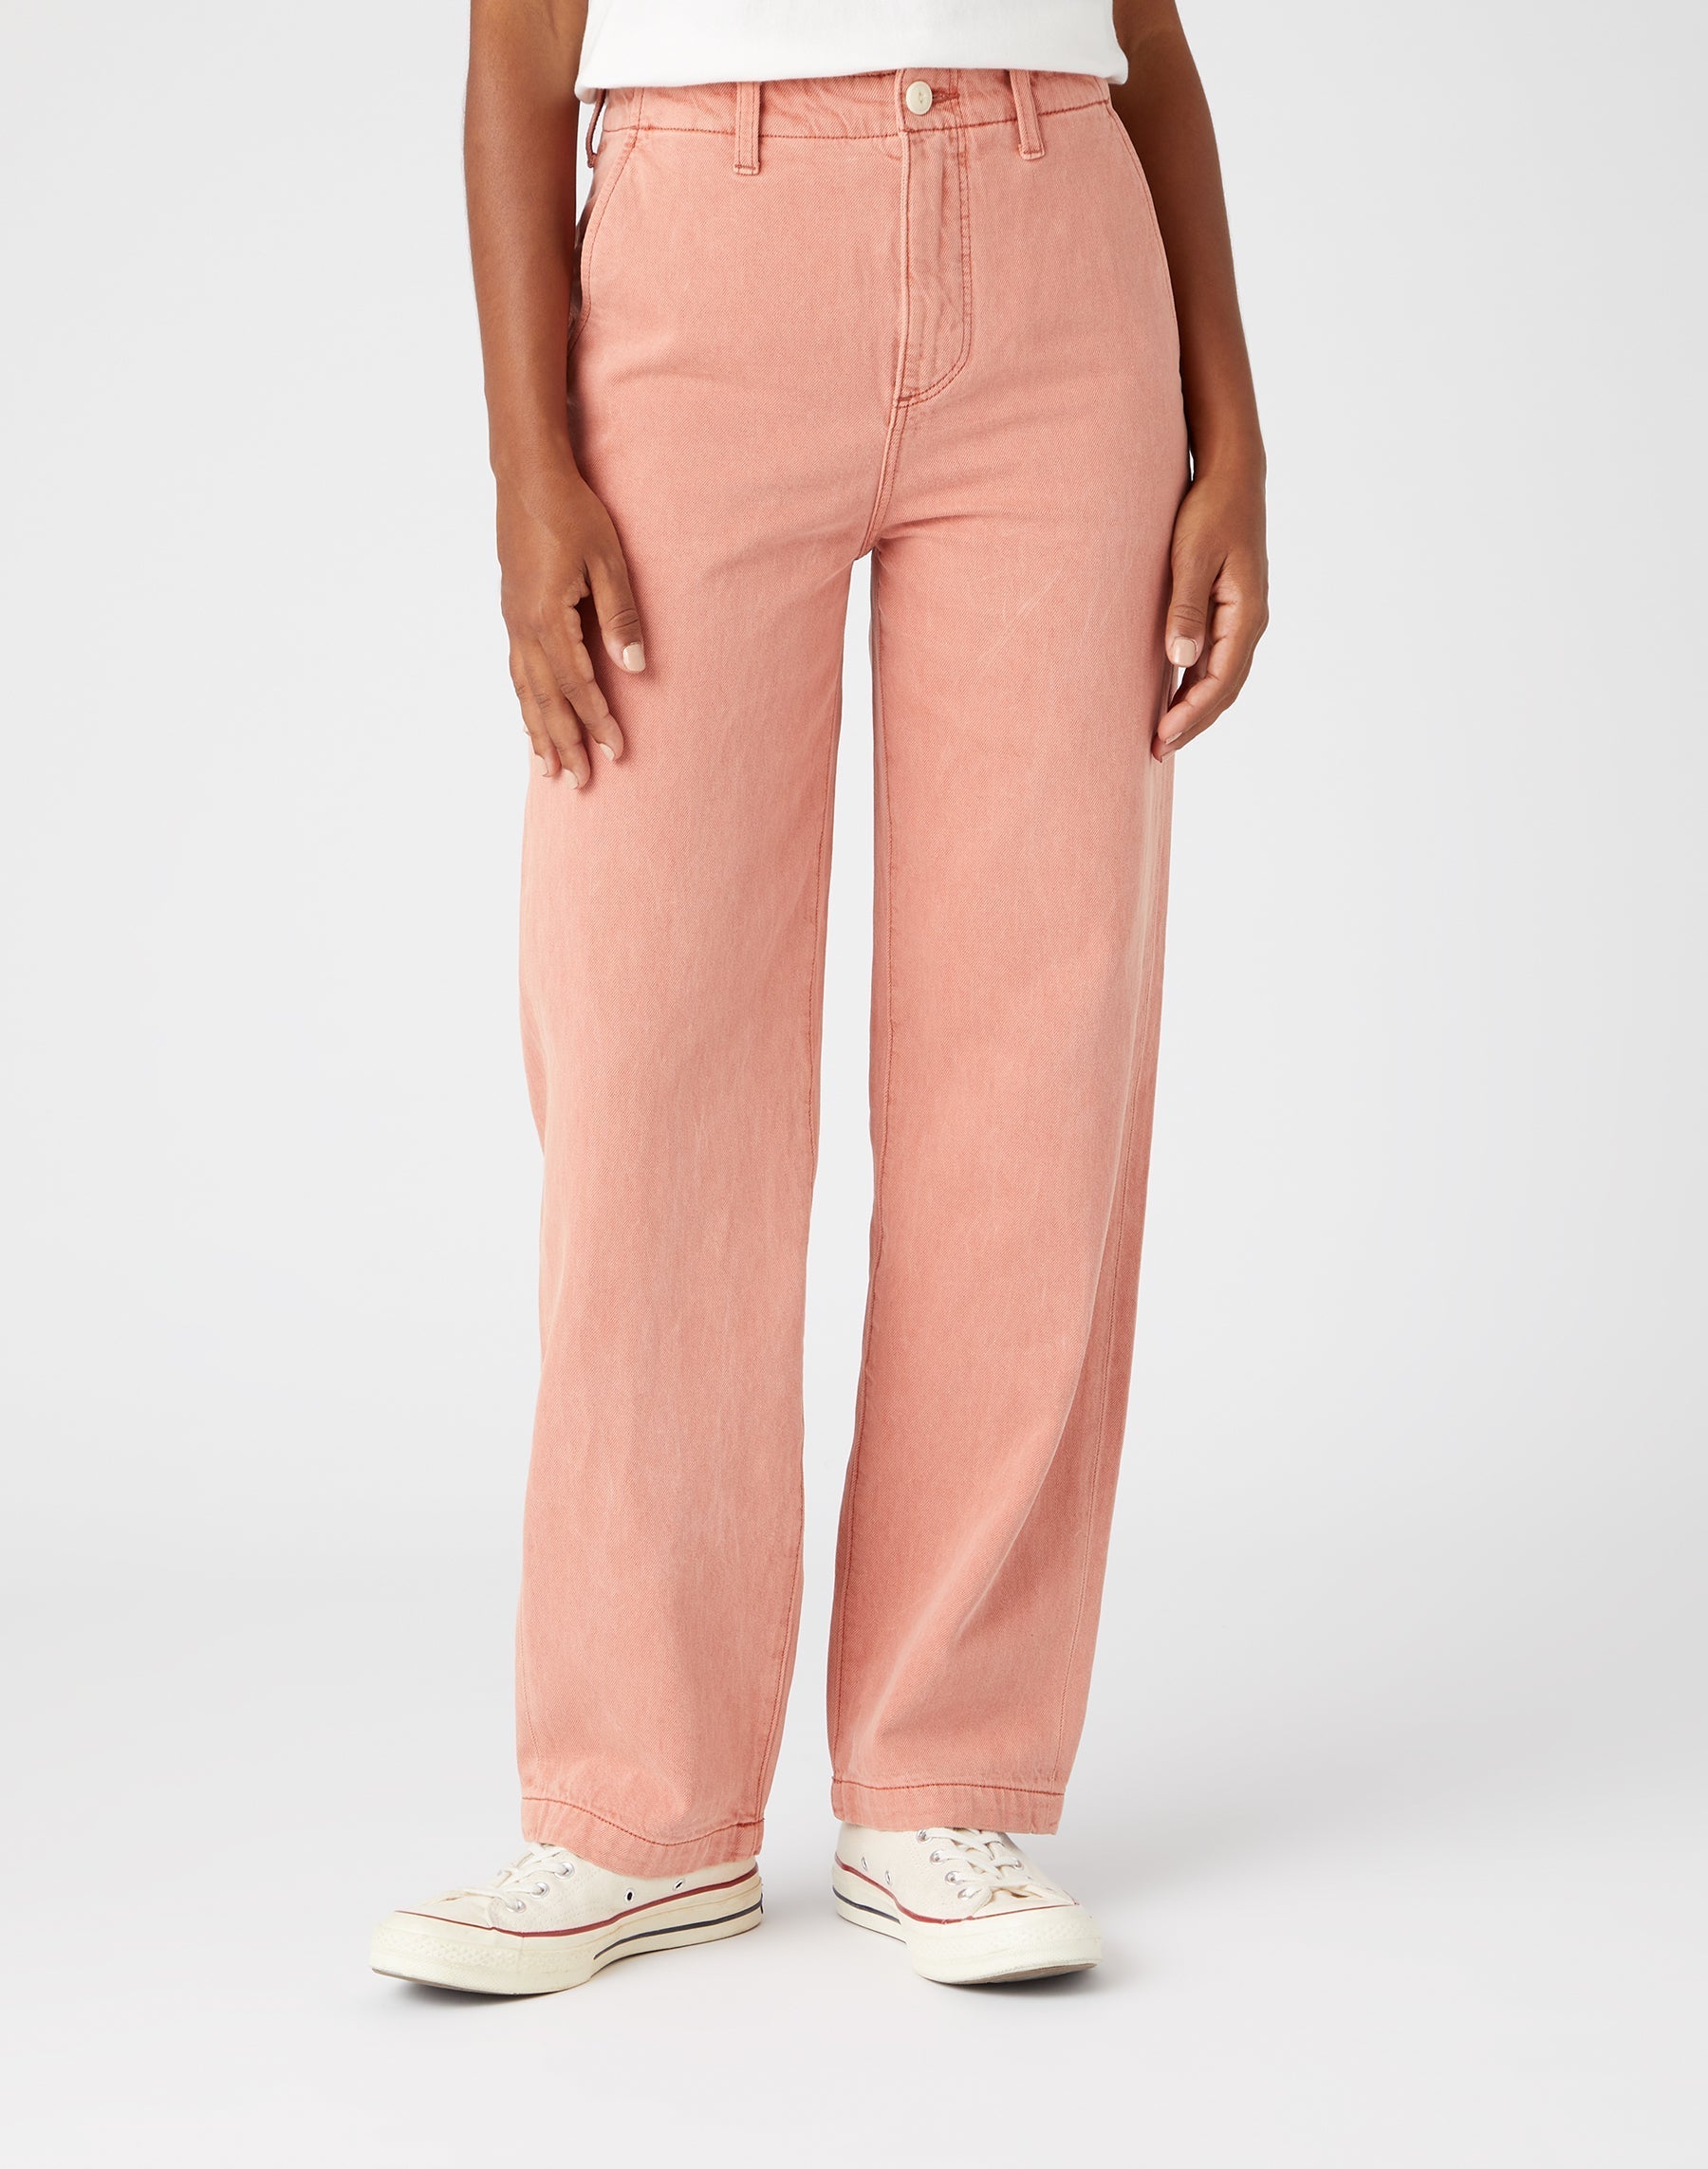 Casey Jones Chino W in Mineral Pink